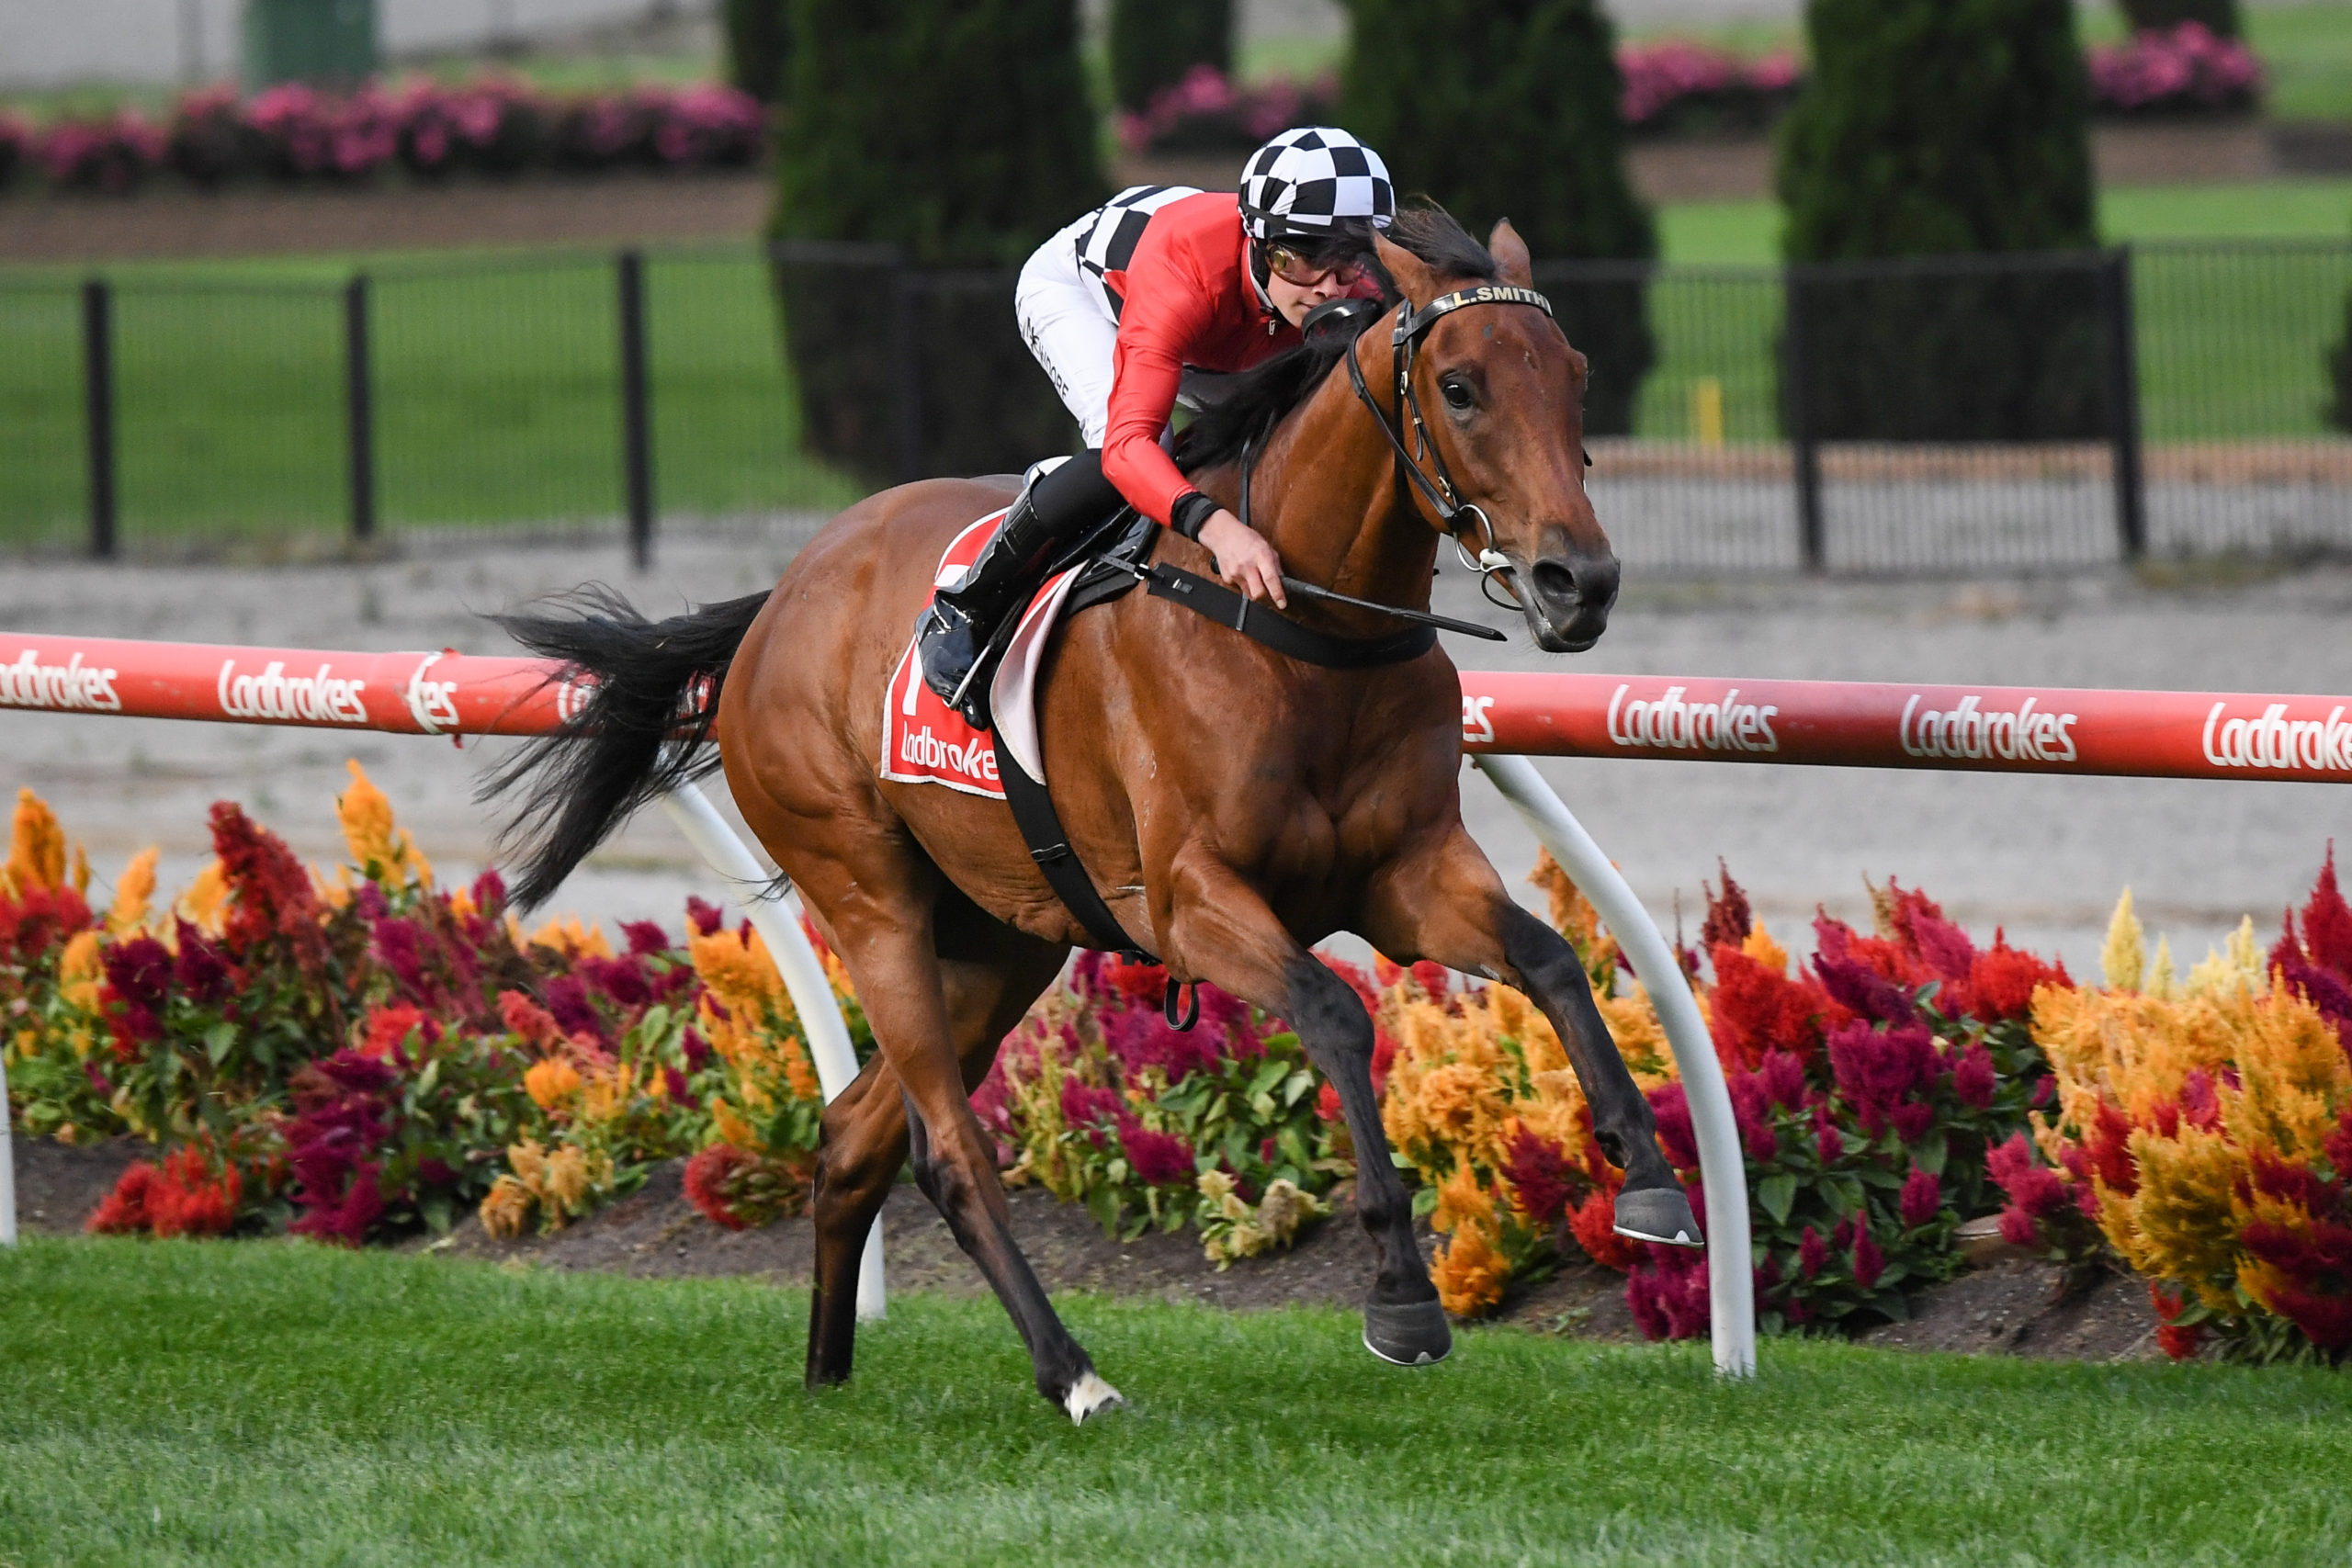 Too Close The Sun Ridden By Lachlan Neindorf Wins The Simpson Construction Handicap At Moonee Valley Racecourse On March 20 2020 In Moonee Ponds Australia. Reg RyanRacing Photos 2 Scaled 1 